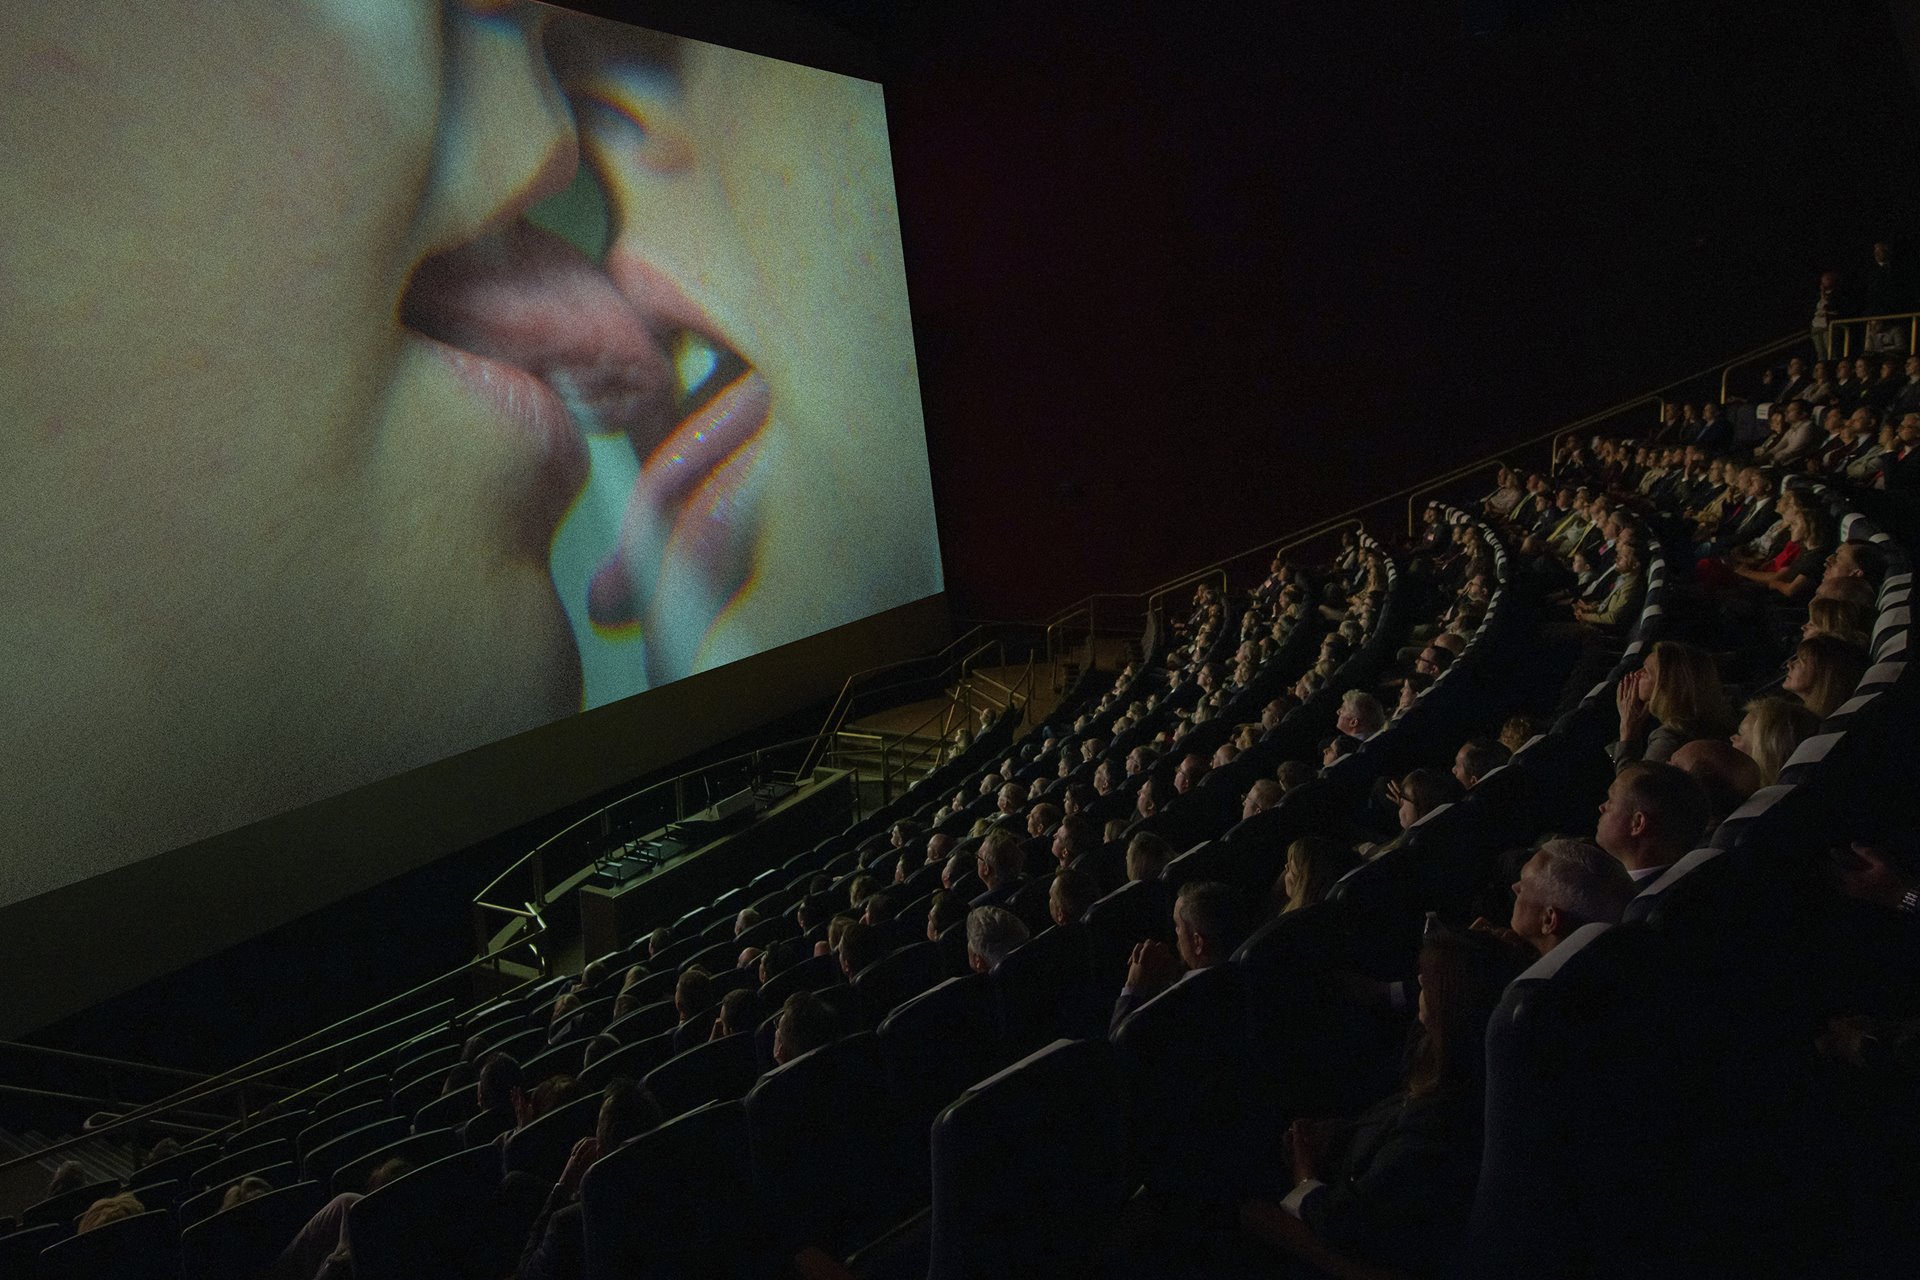 A manipulated NASA archival image of a film screening at the National Air and Space Museum in Washington, DC, United States. The screen has been replaced with an image of two women kissing.&nbsp;